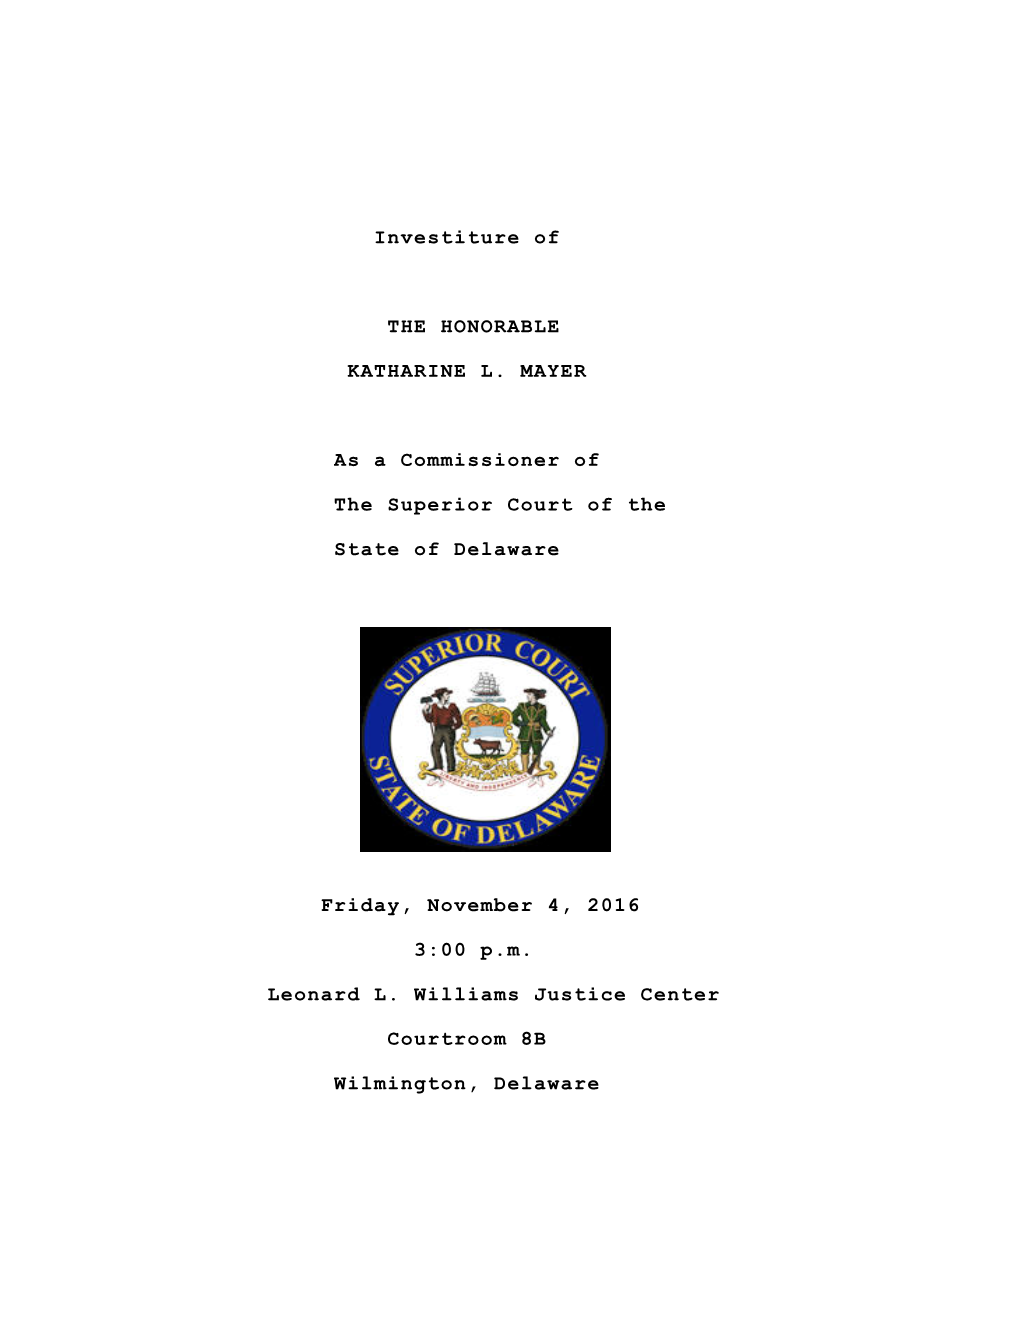 Investiture of the HONORABLE KATHARINE L. MAYER As A